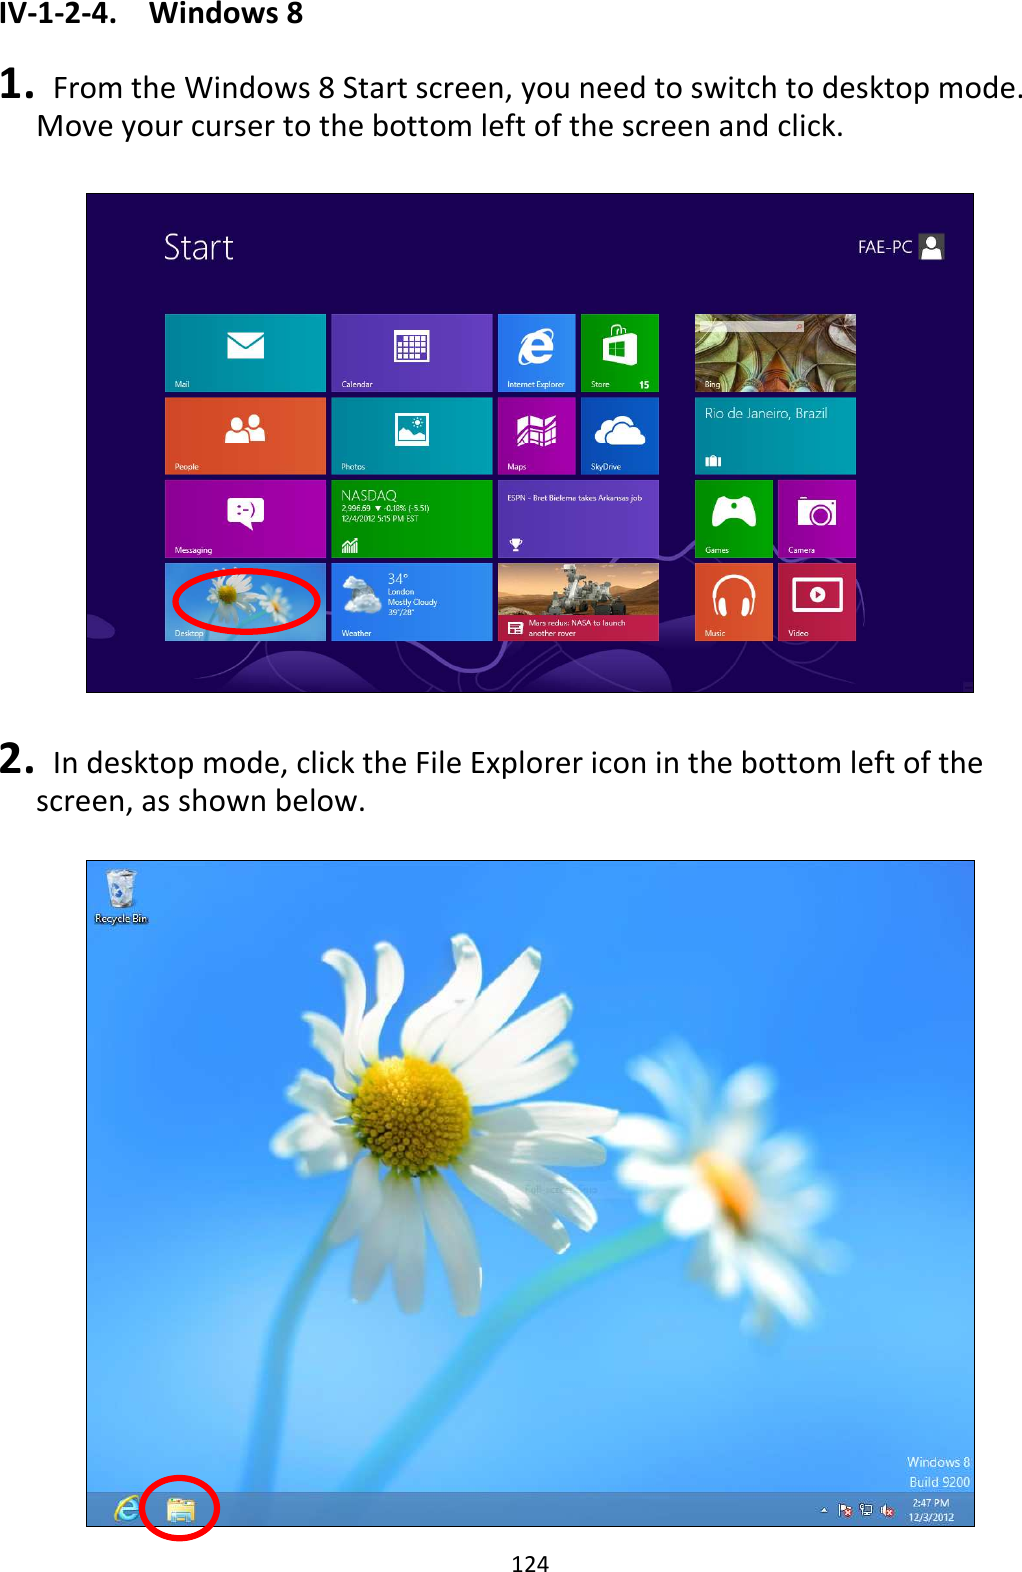 124 IV-1-2-4.  Windows 8  1.   From the Windows 8 Start screen, you need to switch to desktop mode. Move your curser to the bottom left of the screen and click.    2.   In desktop mode, click the File Explorer icon in the bottom left of the screen, as shown below.   